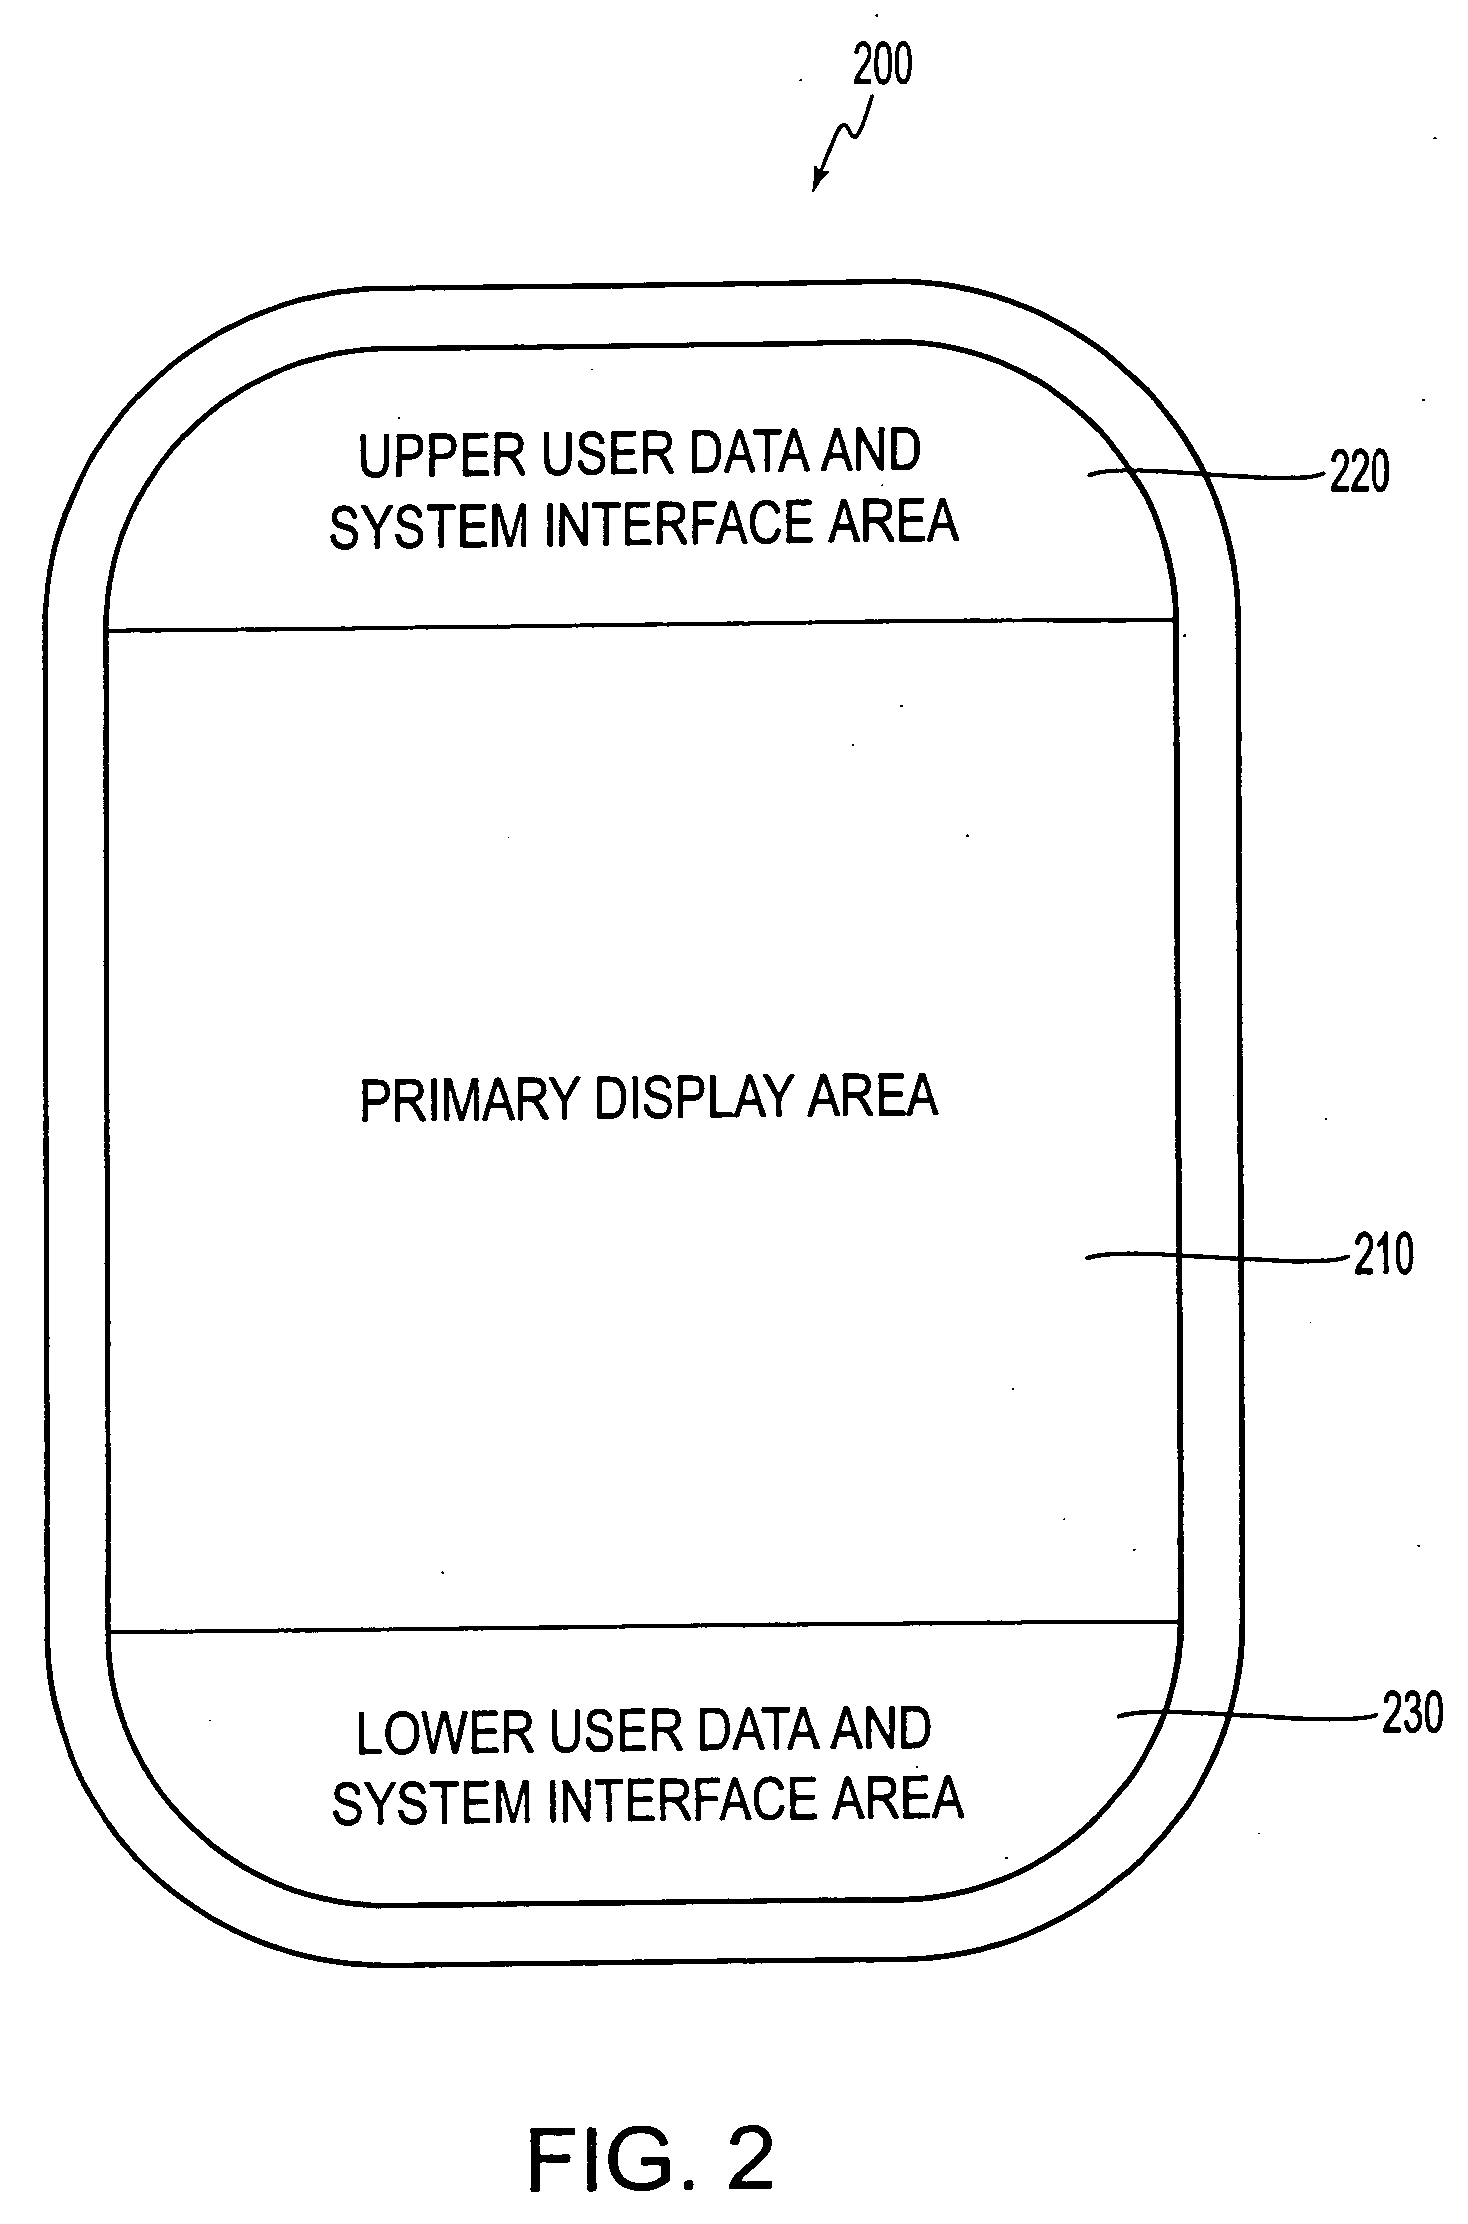 Systems and methods for crew interaction and coordination using portable electronic data storage and display devices